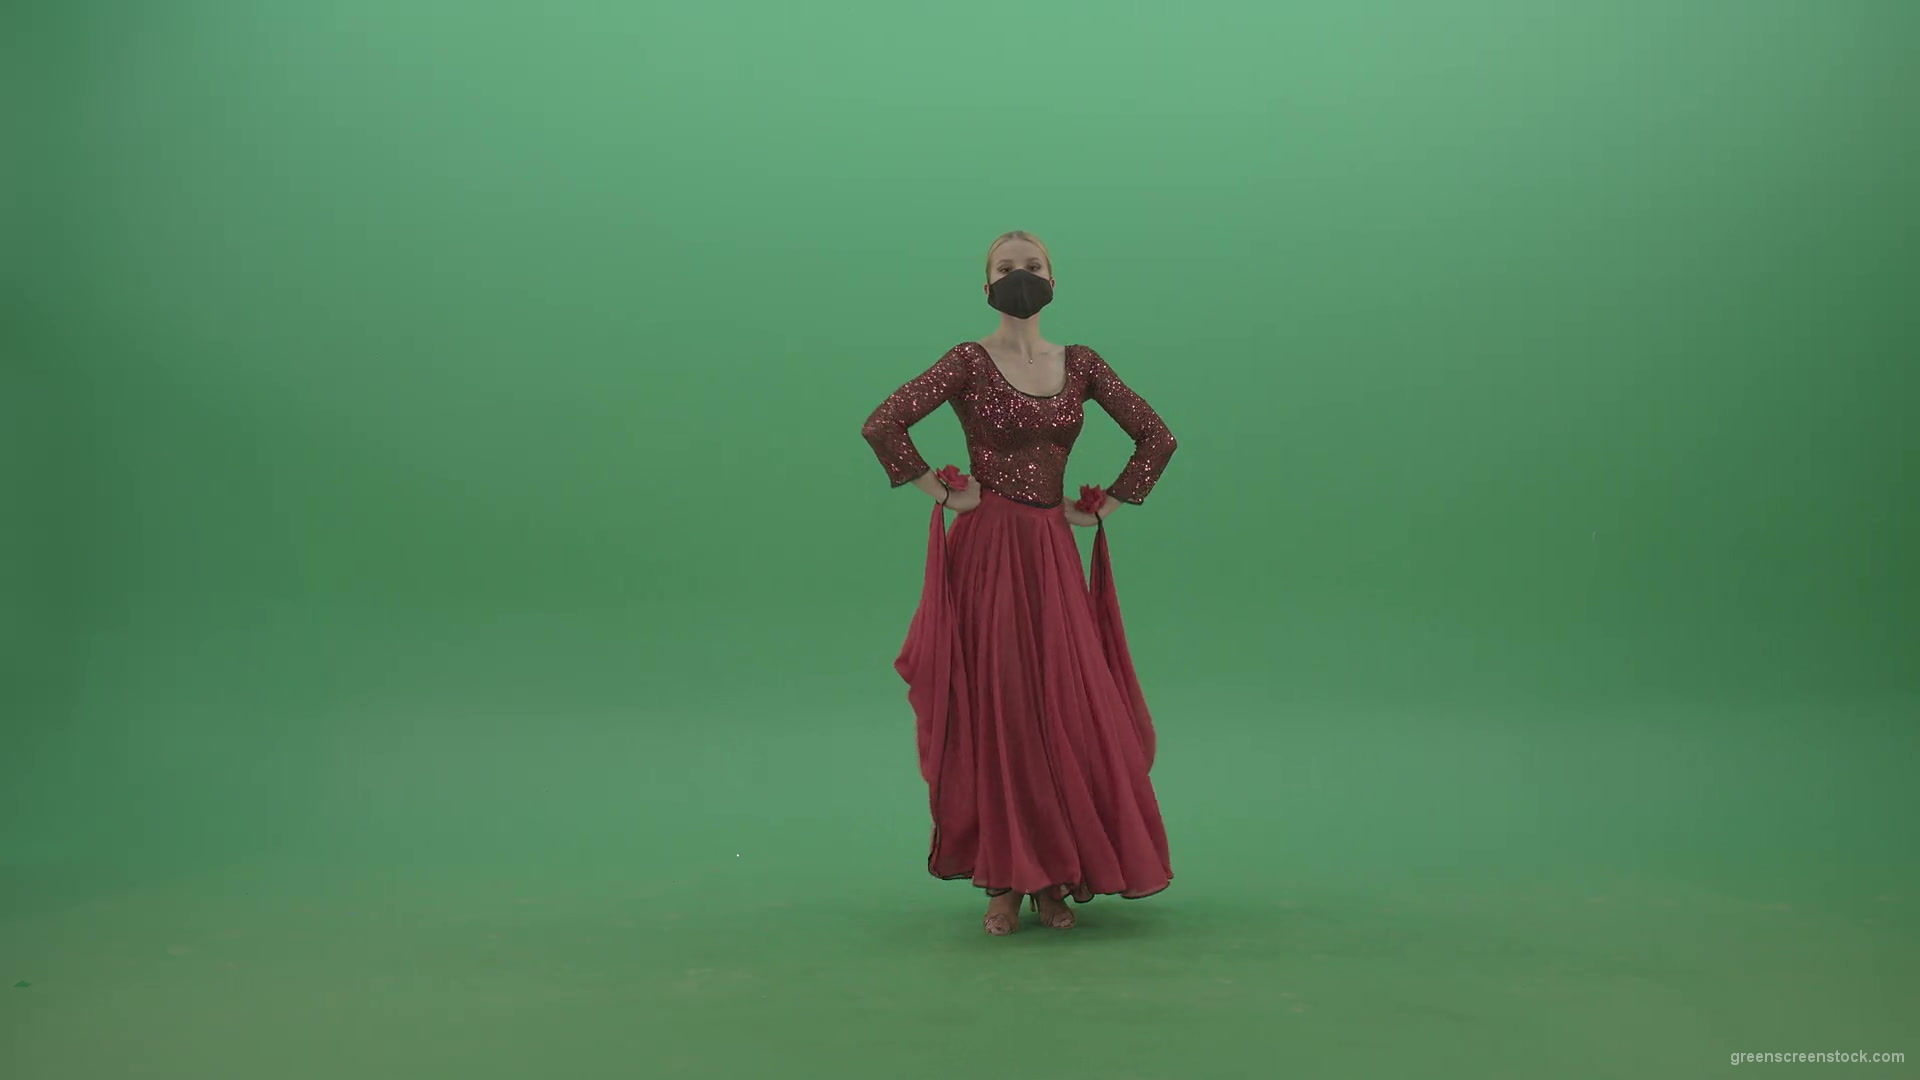 Beauty-Girl-with-black-mask-in-red-rumba-dress-waving-arms-isolated-on-green-screen-4K-Video-Footage-1920_005 Green Screen Stock